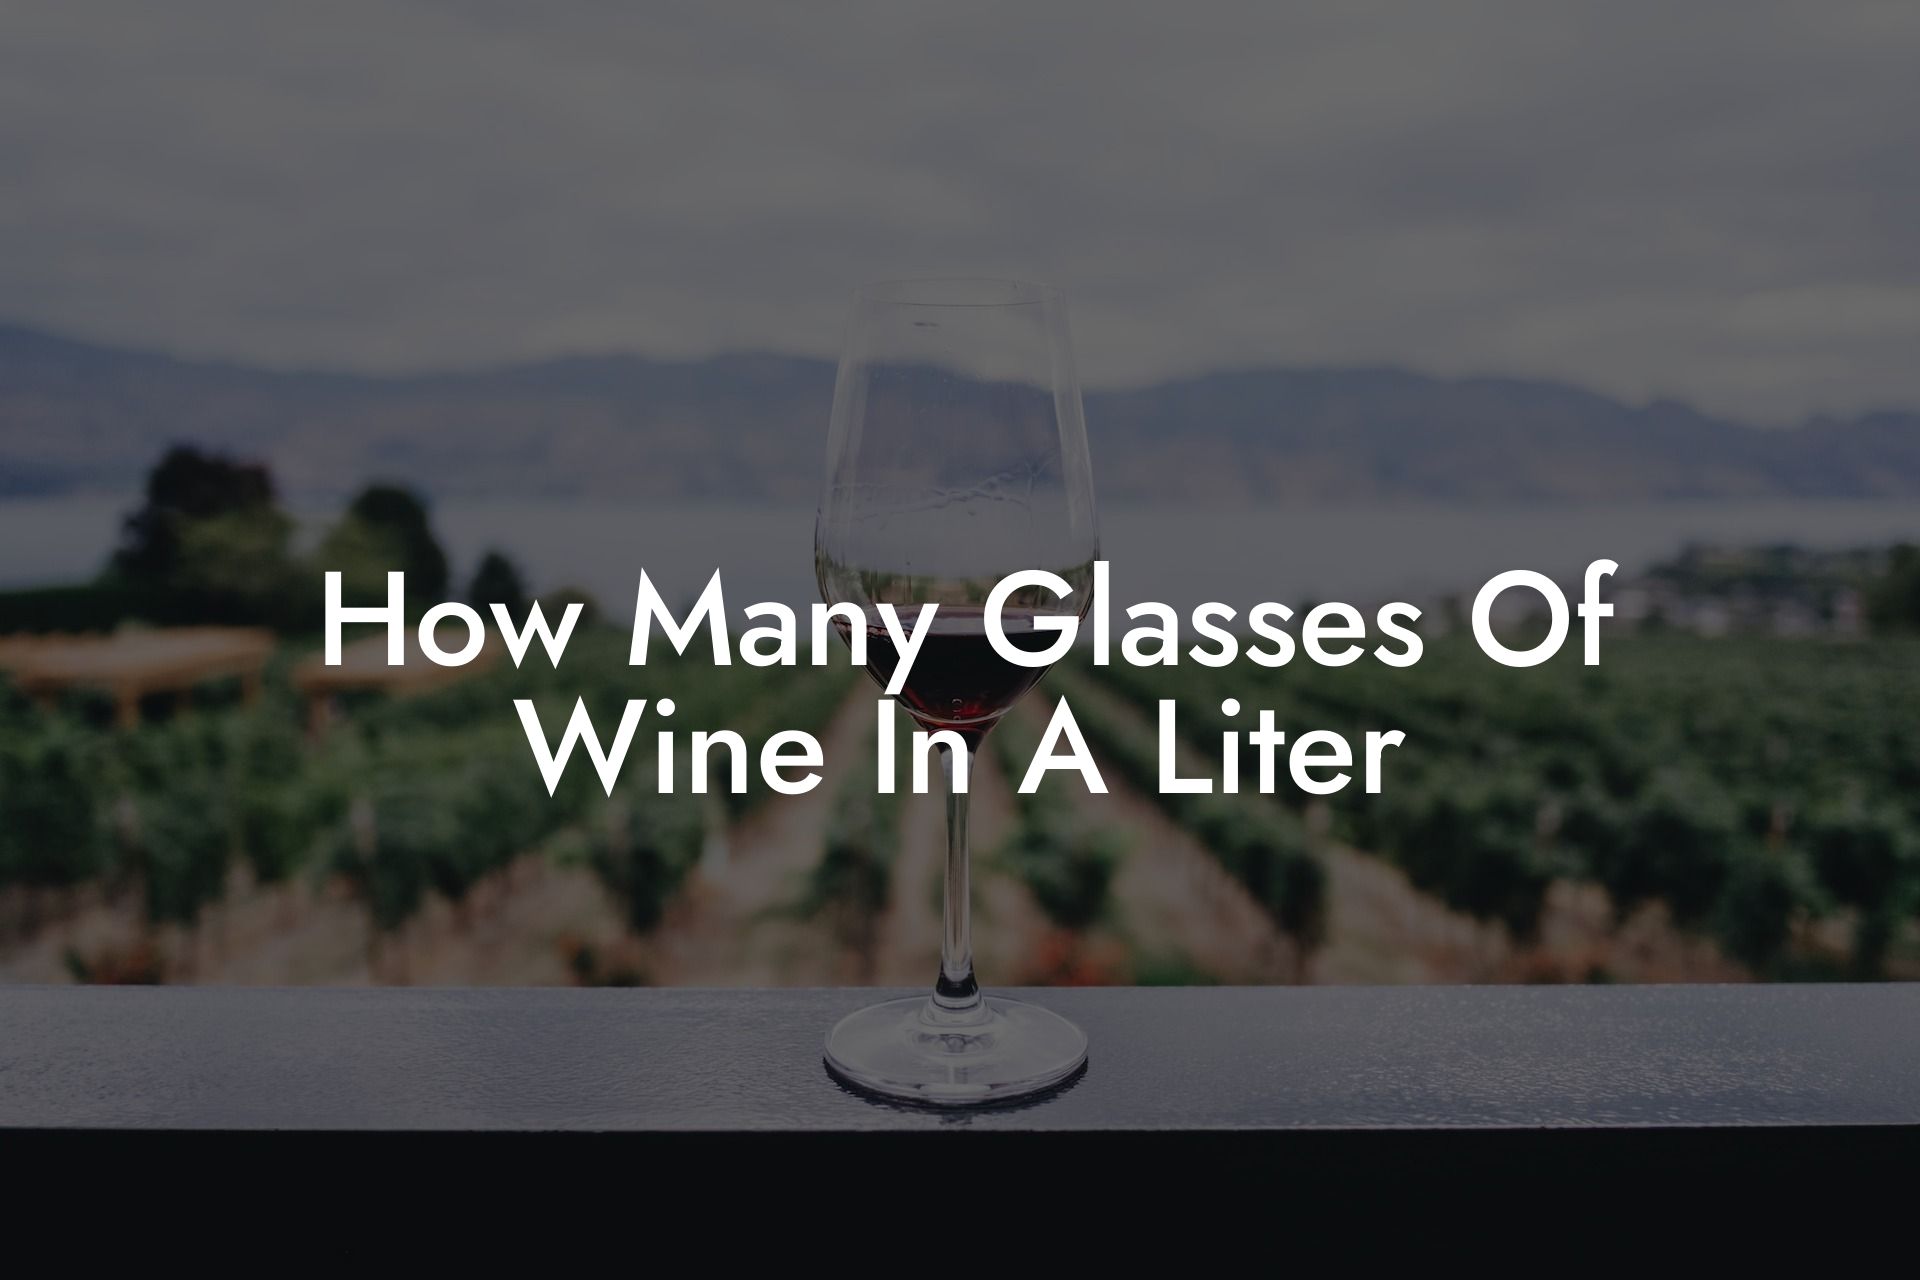 How Many Glasses Of Wine In A Liter